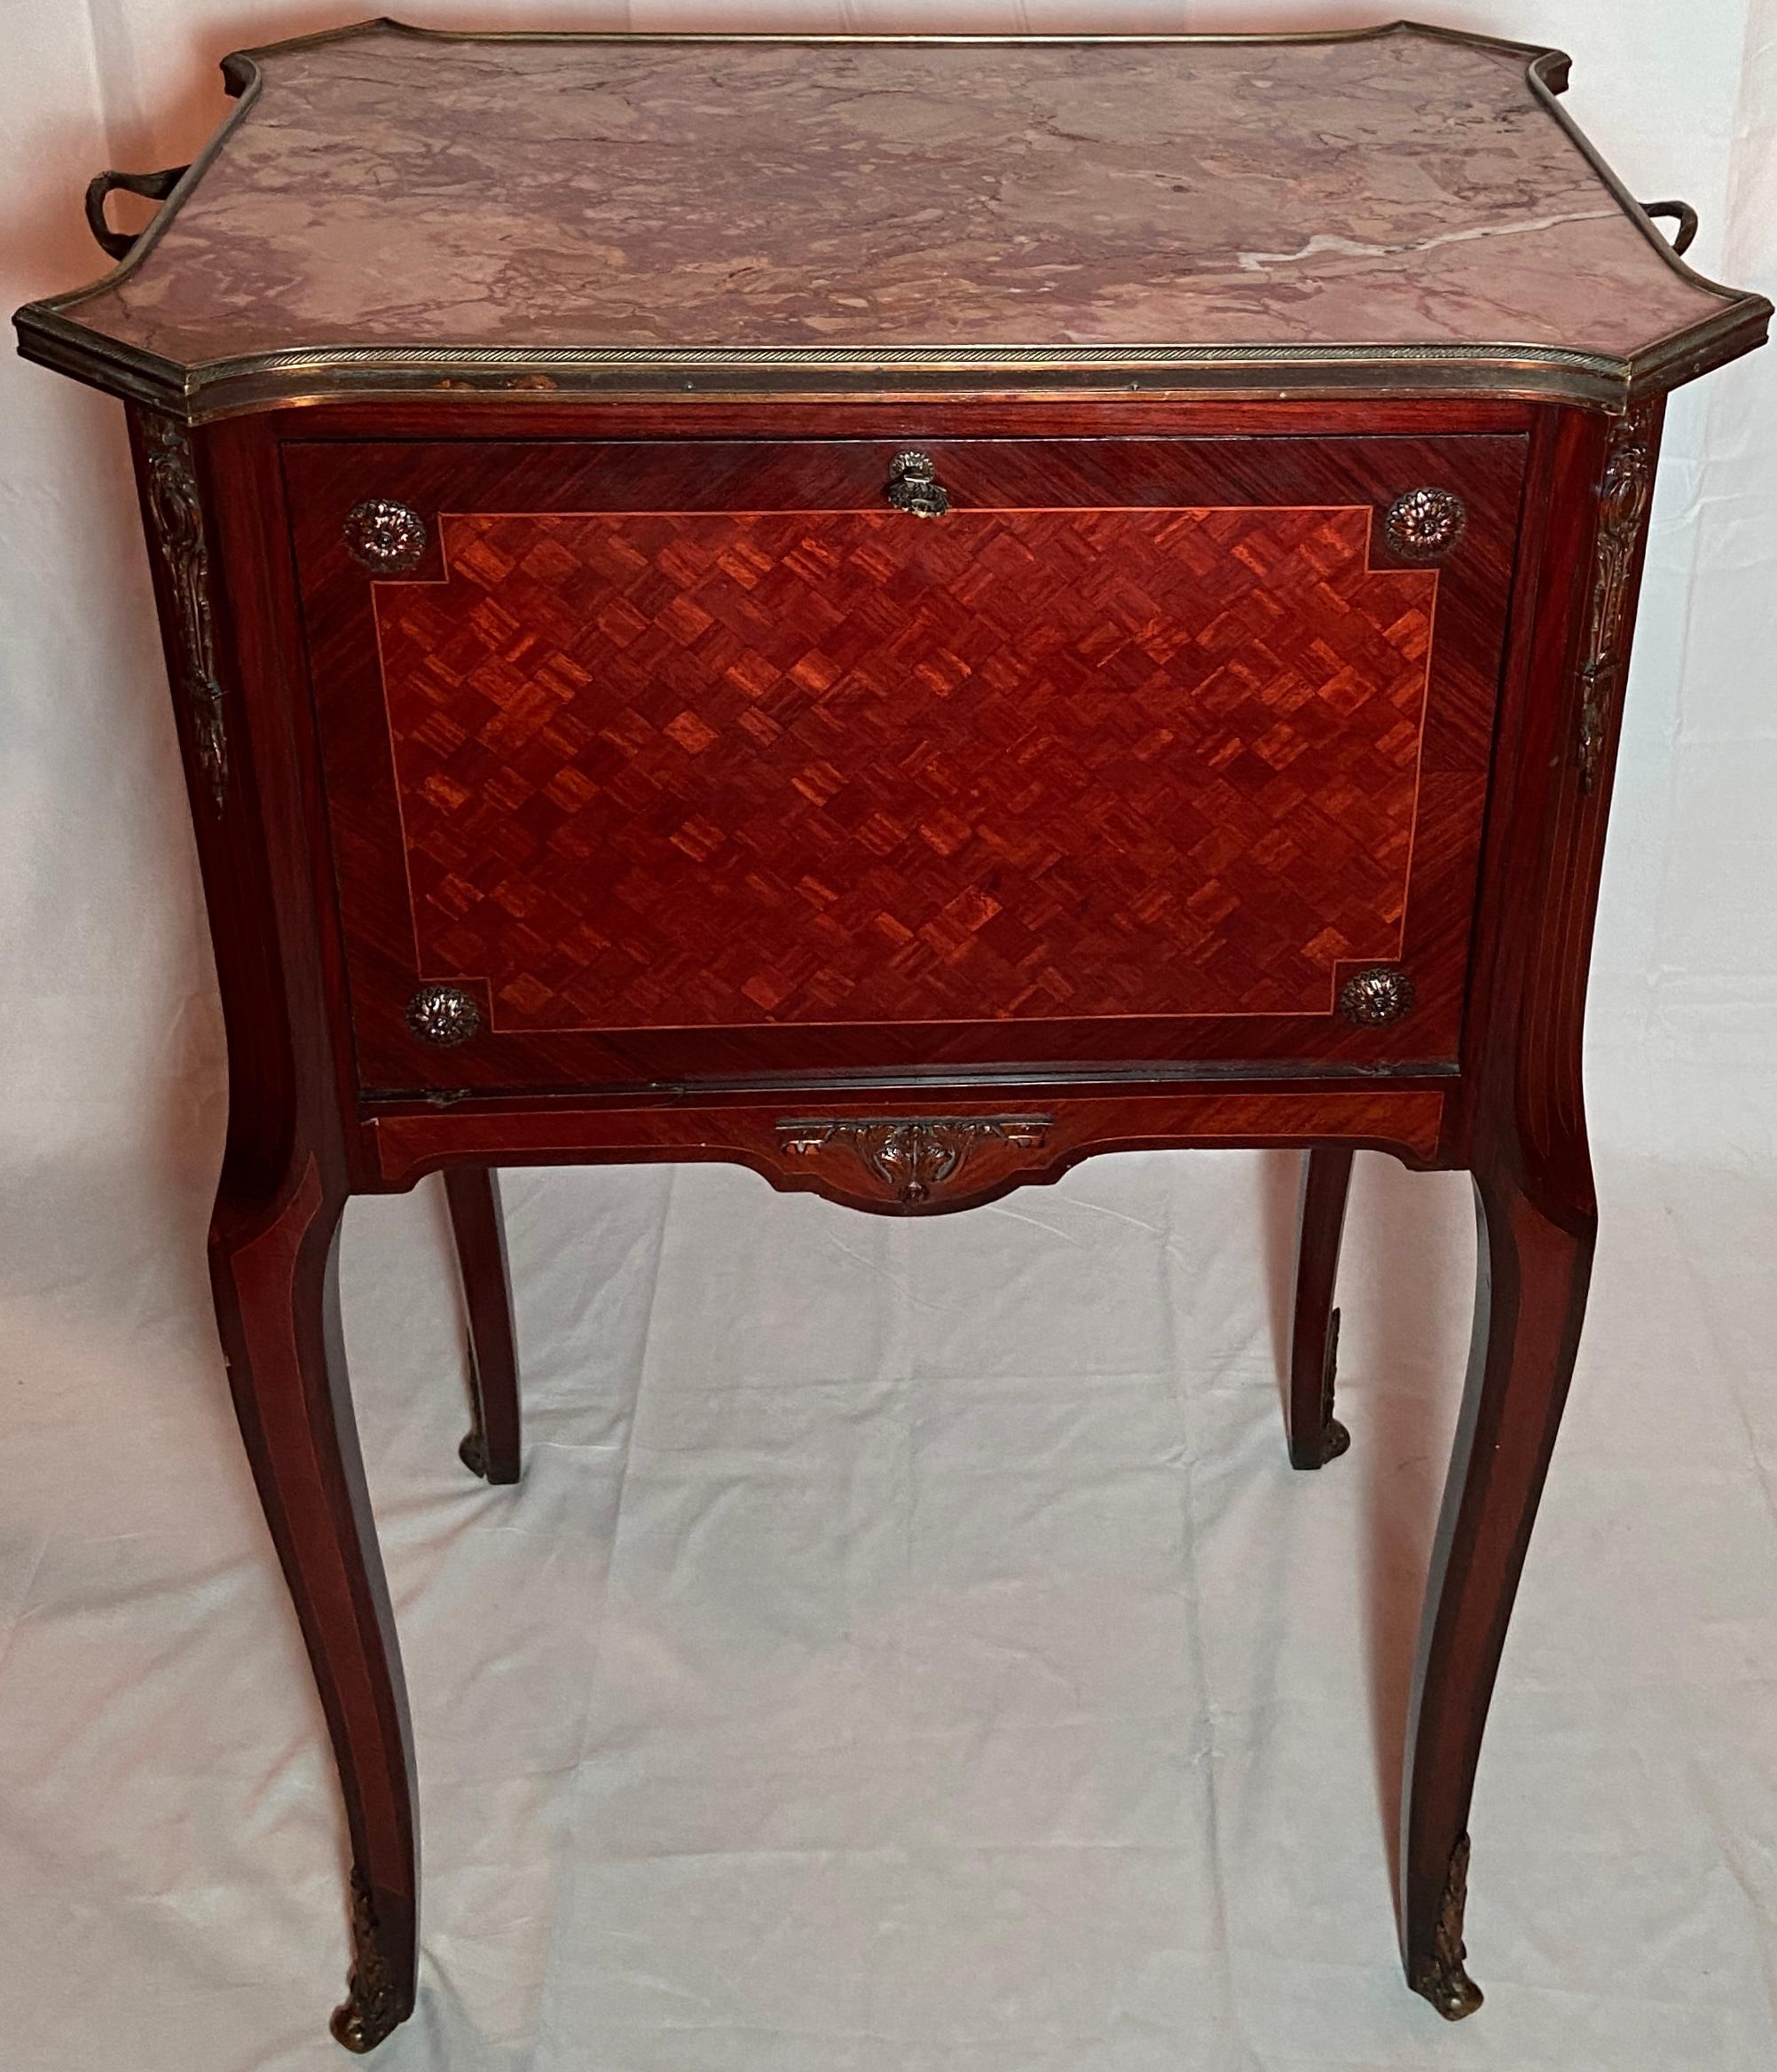 Antique French Marble-Top and Gold Bronze Mounted Mahogany Drinks Table, Circa 1890.
Handsome marquetry on front, glass sides and mirrored interior. 